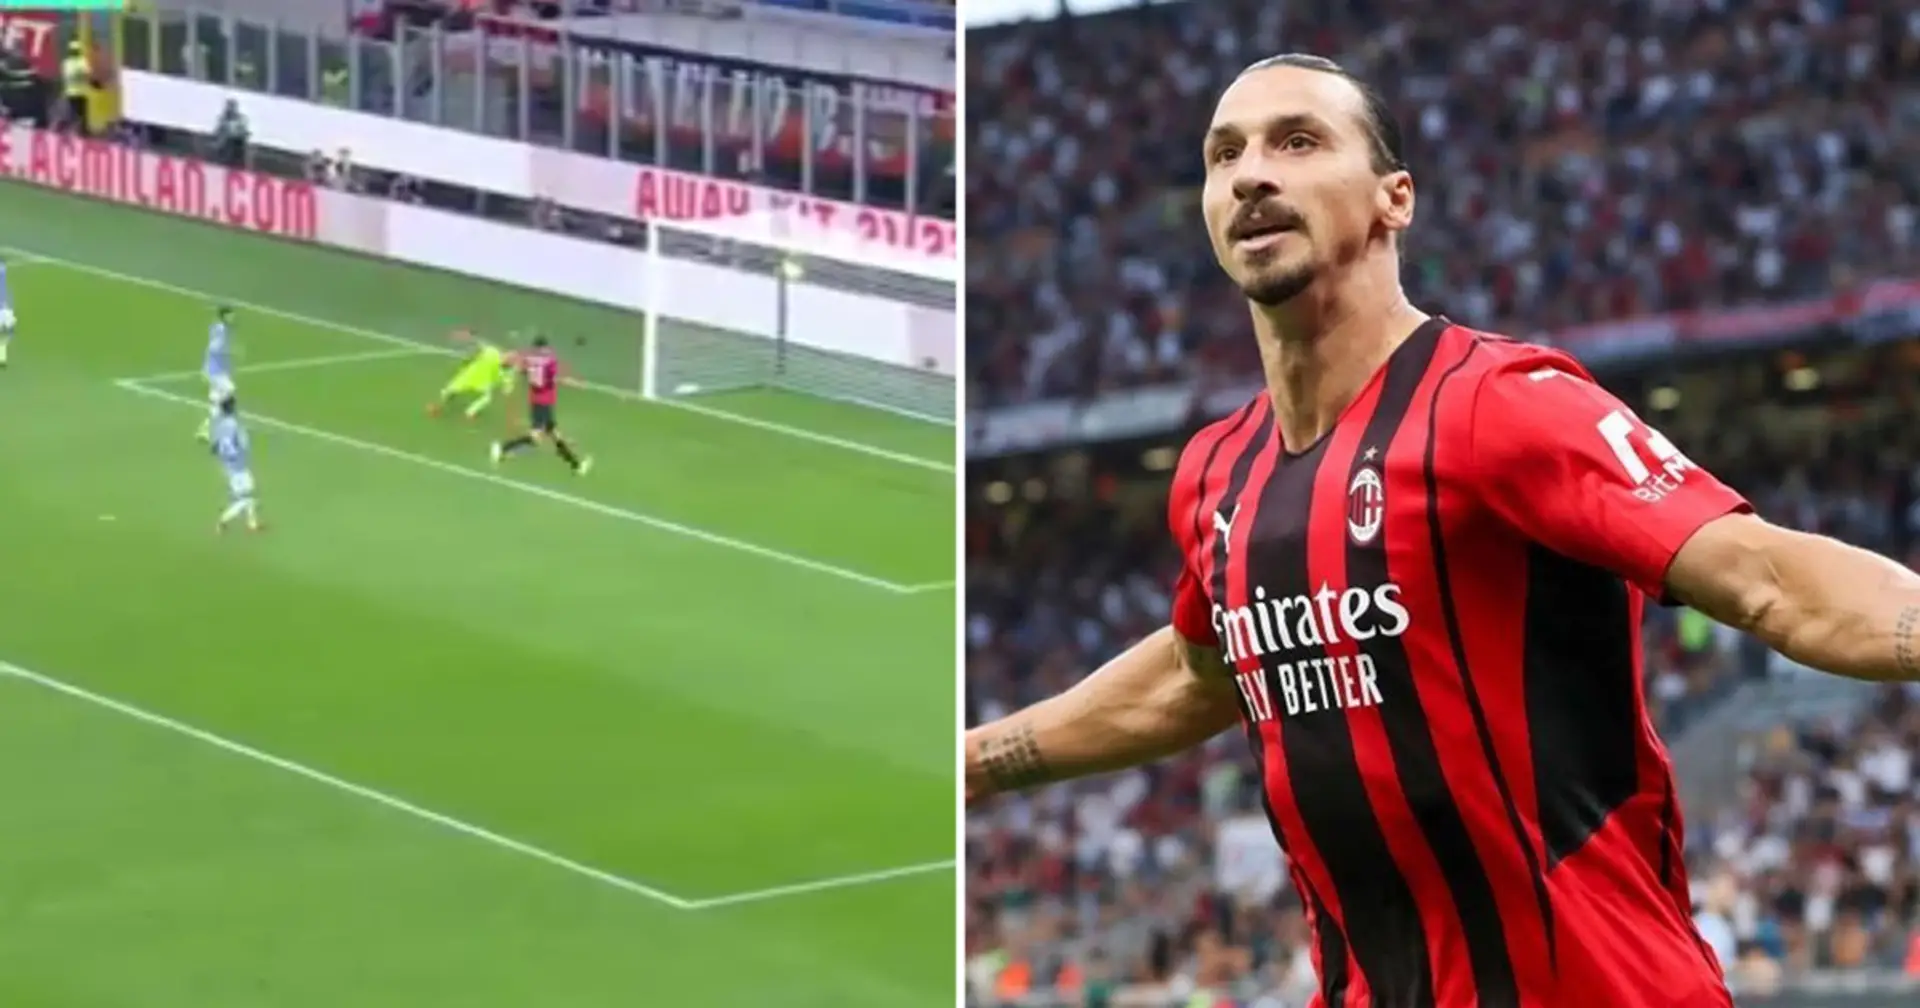 Zlatan Ibrahimovic returns to pitch after 4-month absence, scores within 7 minutes